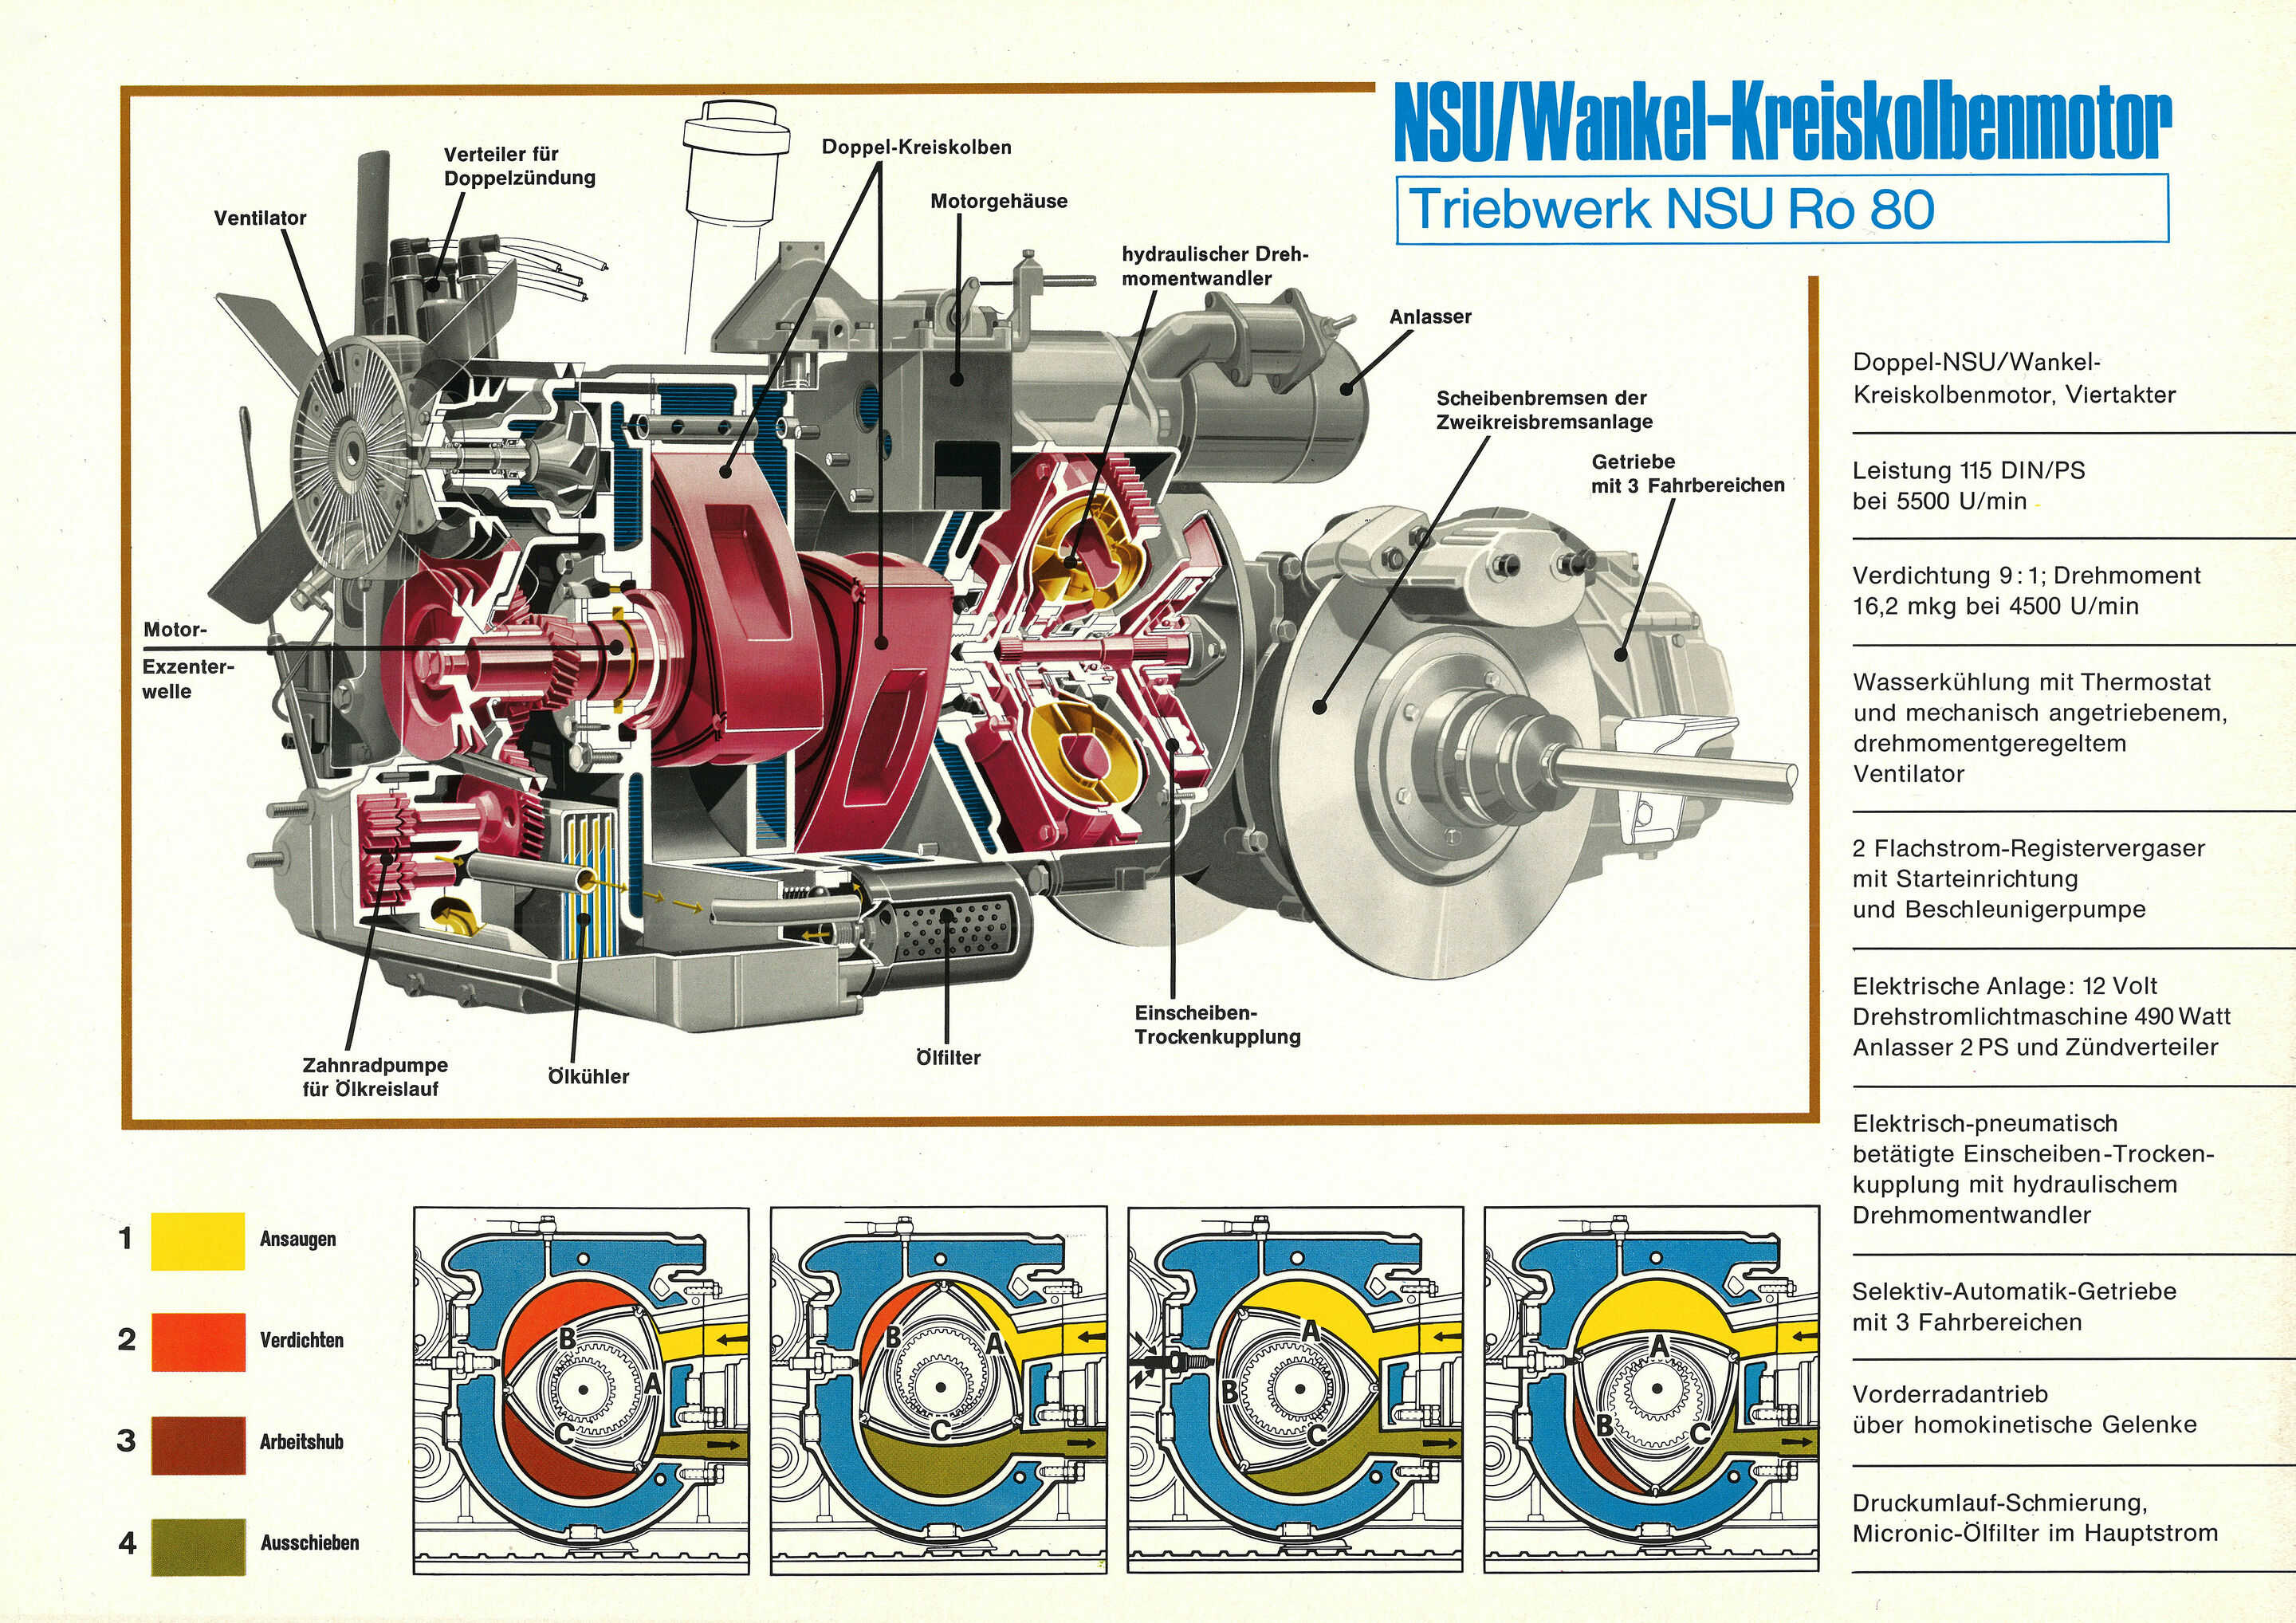 The Wankel engine‘s appearance and mode of operation are explained in an understandable way